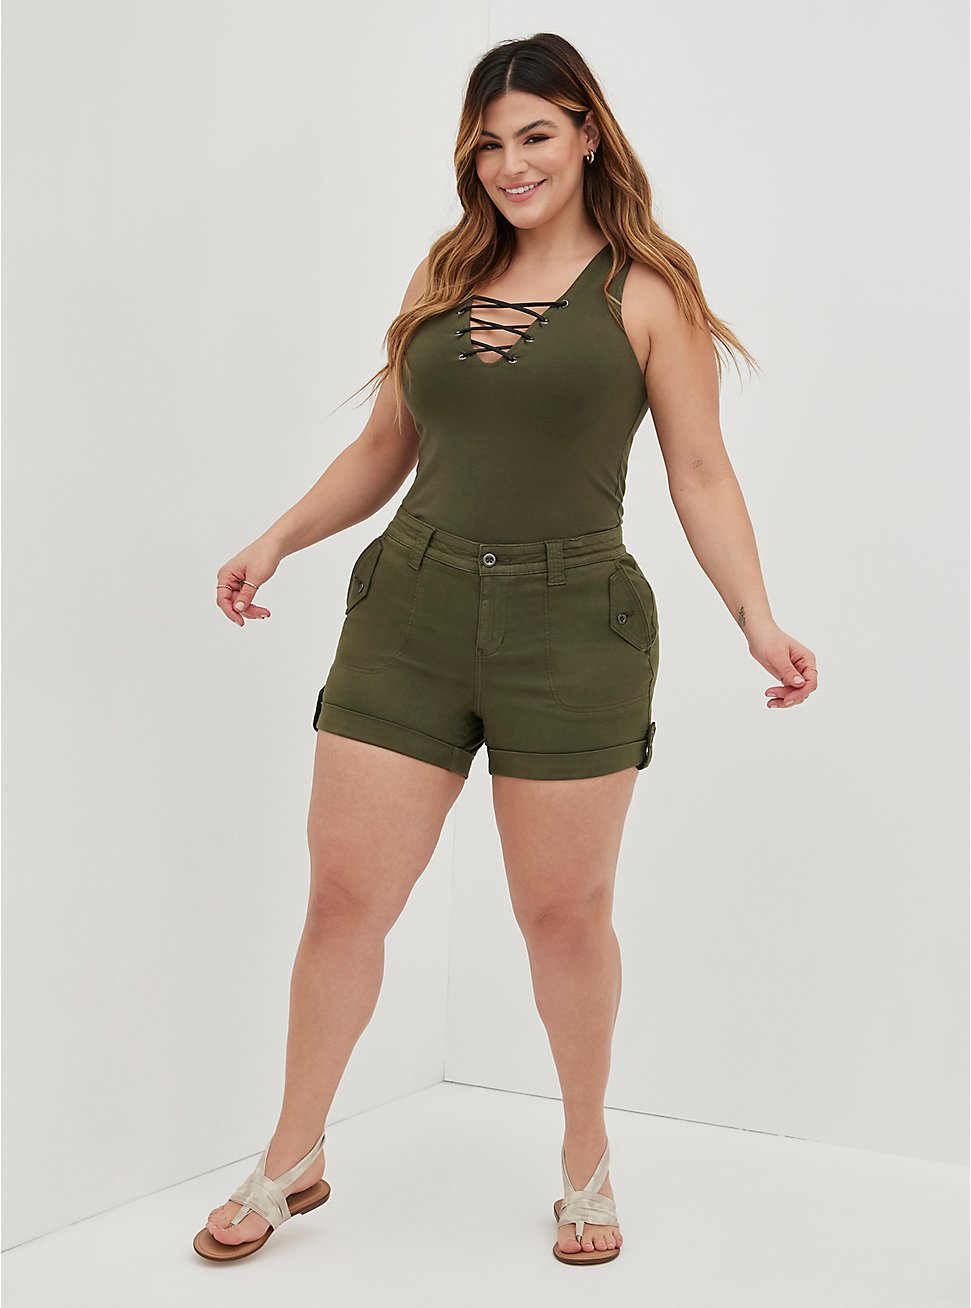 Plus Size Military Shortie Short - Twill Olive, DEEP DEPTHS, hi-res